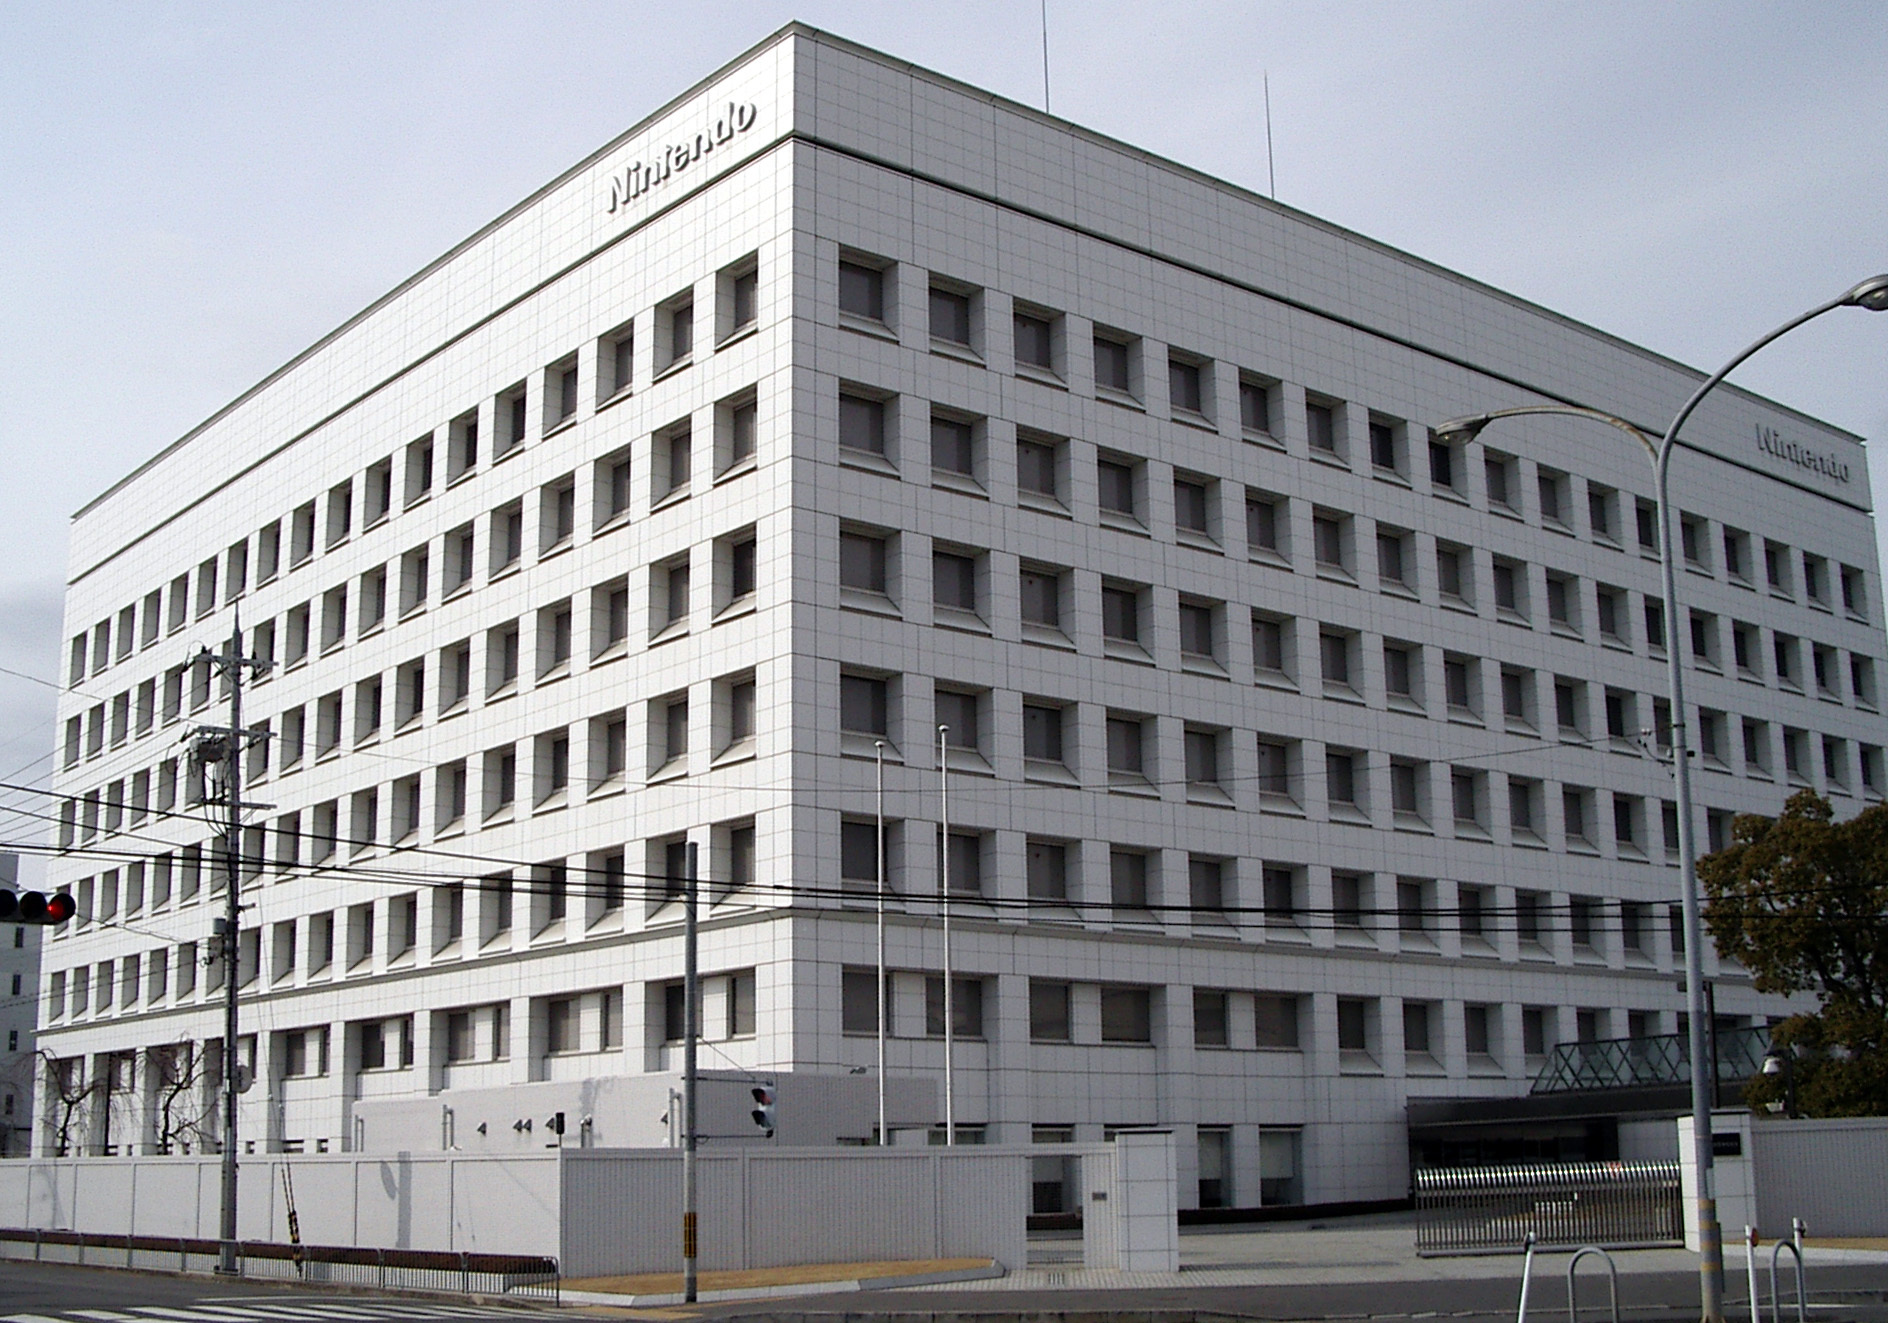 Nintendo office / Head Quarters of Nintendo, Minami-ku, Kyoto, Japan. The picture was taken by the poster in February, 2006. / Image credit: Moja~commonswiki / This work is licensed under Creative Commons Attribution-ShareAlike 3.0